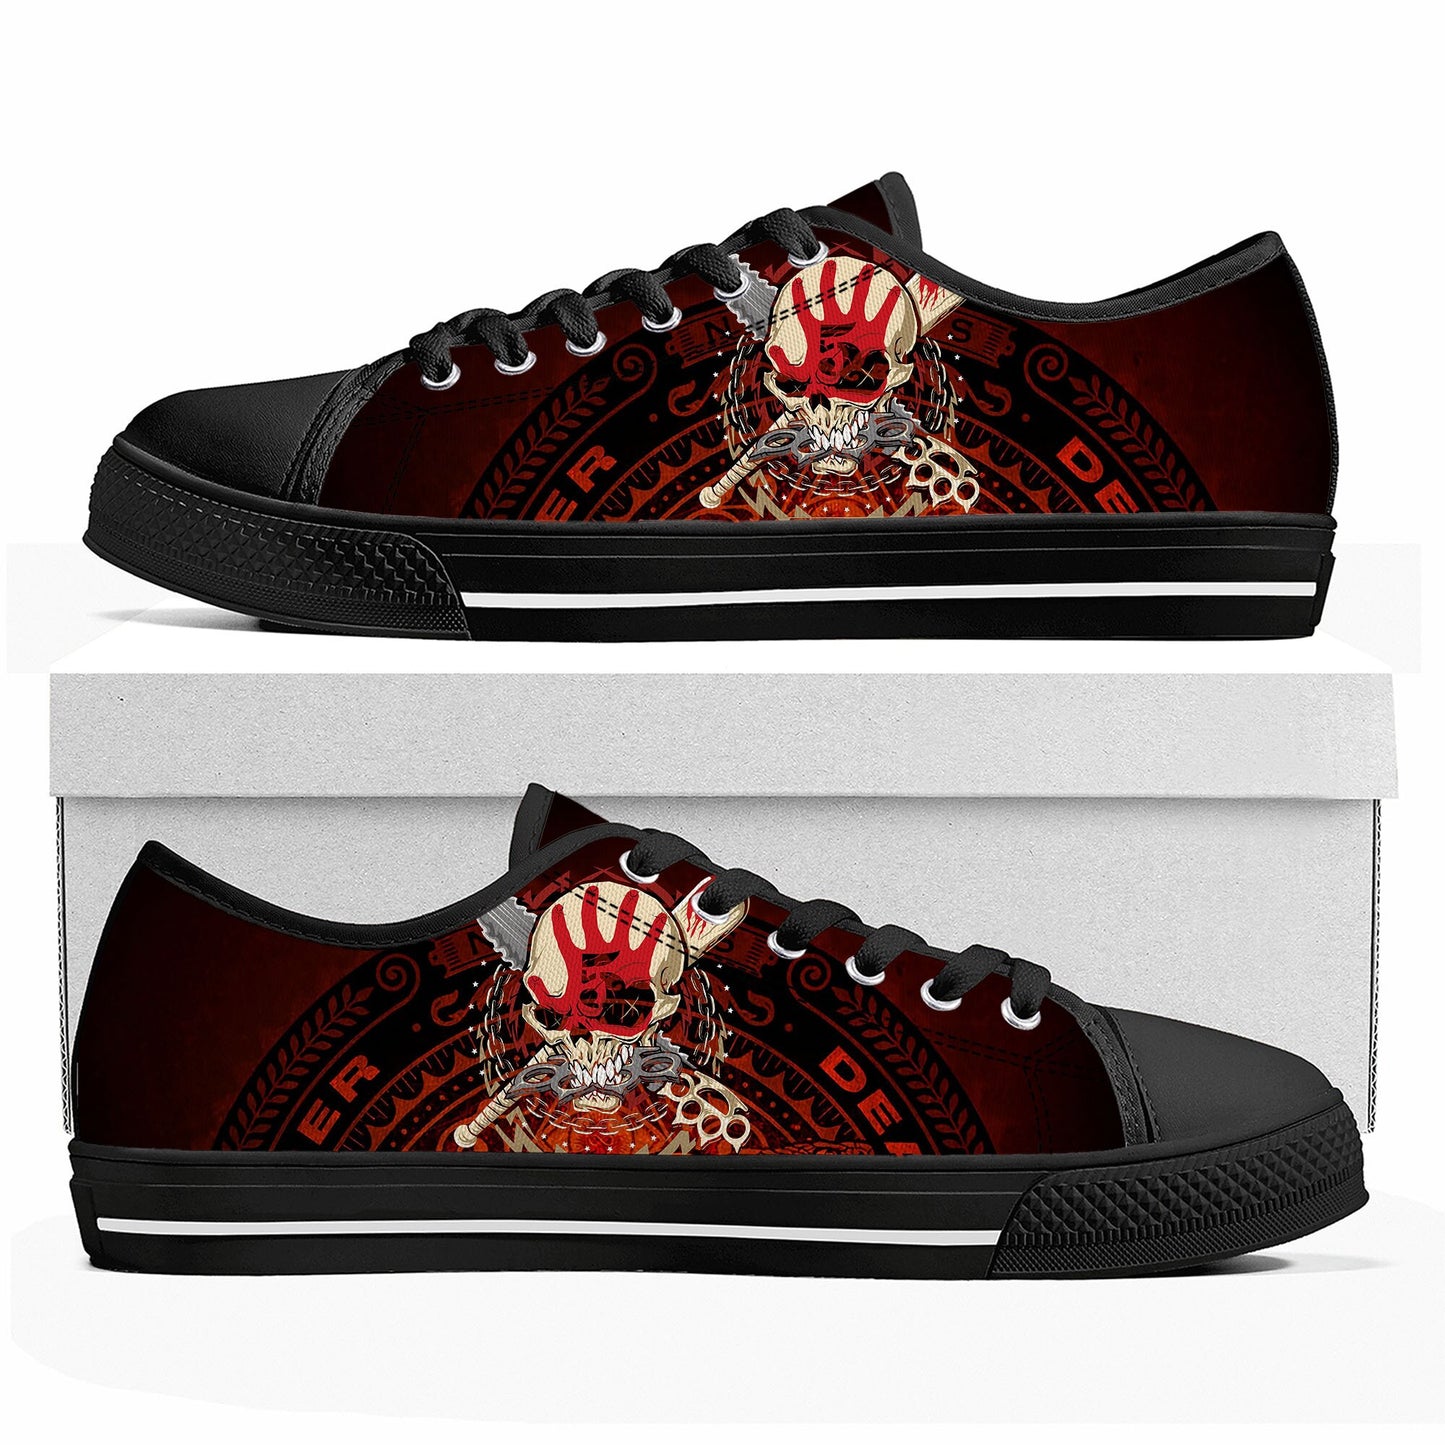 Five Finger Death Punch Band Low Top  Shoes